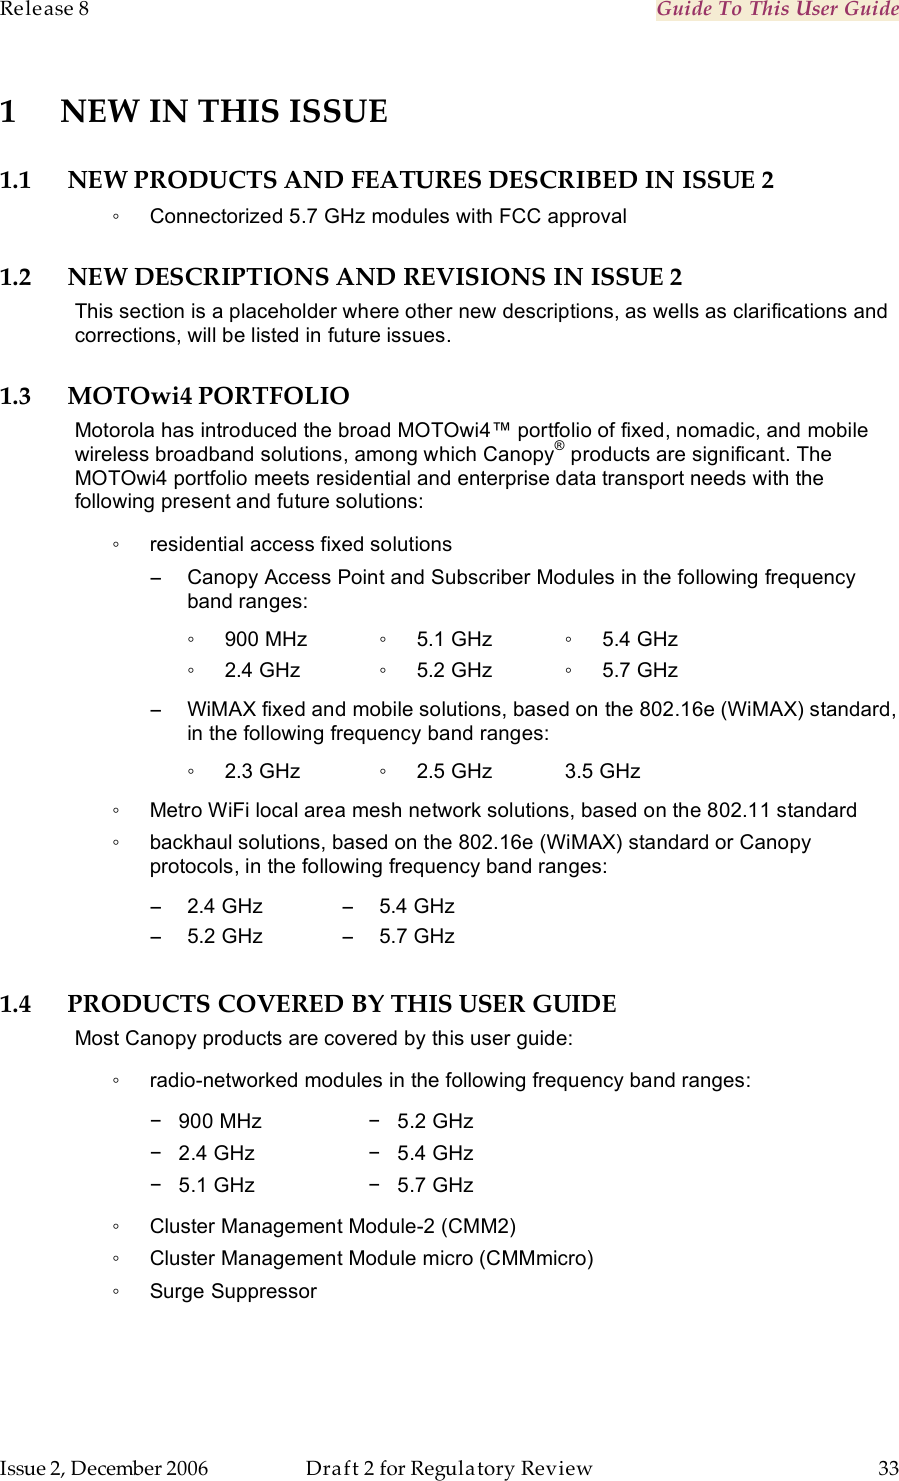 Release 8    Guide To This User Guide                  March 200                  Through Software Release 6.   Issue 2, December 2006  Draft 2 for Regulatory Review  33     1 NEW IN THIS ISSUE 1.1 NEW PRODUCTS AND FEATURES DESCRIBED IN ISSUE 2 ◦  Connectorized 5.7 GHz modules with FCC approval 1.2 NEW DESCRIPTIONS AND REVISIONS IN ISSUE 2 This section is a placeholder where other new descriptions, as wells as clarifications and corrections, will be listed in future issues. 1.3 MOTOwi4 PORTFOLIO Motorola has introduced the broad MOTOwi4™ portfolio of fixed, nomadic, and mobile wireless broadband solutions, among which Canopy® products are significant. The MOTOwi4 portfolio meets residential and enterprise data transport needs with the following present and future solutions: ◦  residential access fixed solutions −  Canopy Access Point and Subscriber Modules in the following frequency band ranges: ◦  900 MHz ◦  2.4 GHz ◦  5.1 GHz ◦  5.2 GHz ◦  5.4 GHz ◦  5.7 GHz −  WiMAX fixed and mobile solutions, based on the 802.16e (WiMAX) standard, in the following frequency band ranges: ◦  2.3 GHz ◦  2.5 GHz 3.5 GHz ◦  Metro WiFi local area mesh network solutions, based on the 802.11 standard ◦  backhaul solutions, based on the 802.16e (WiMAX) standard or Canopy protocols, in the following frequency band ranges: −  2.4 GHz −  5.2 GHz −  5.4 GHz −  5.7 GHz 1.4 PRODUCTS COVERED BY THIS USER GUIDE Most Canopy products are covered by this user guide: ◦  radio-networked modules in the following frequency band ranges: −   900 MHz −   2.4 GHz −   5.1 GHz  −   5.2 GHz −   5.4 GHz −   5.7 GHz ◦  Cluster Management Module-2 (CMM2) ◦  Cluster Management Module micro (CMMmicro) ◦  Surge Suppressor 